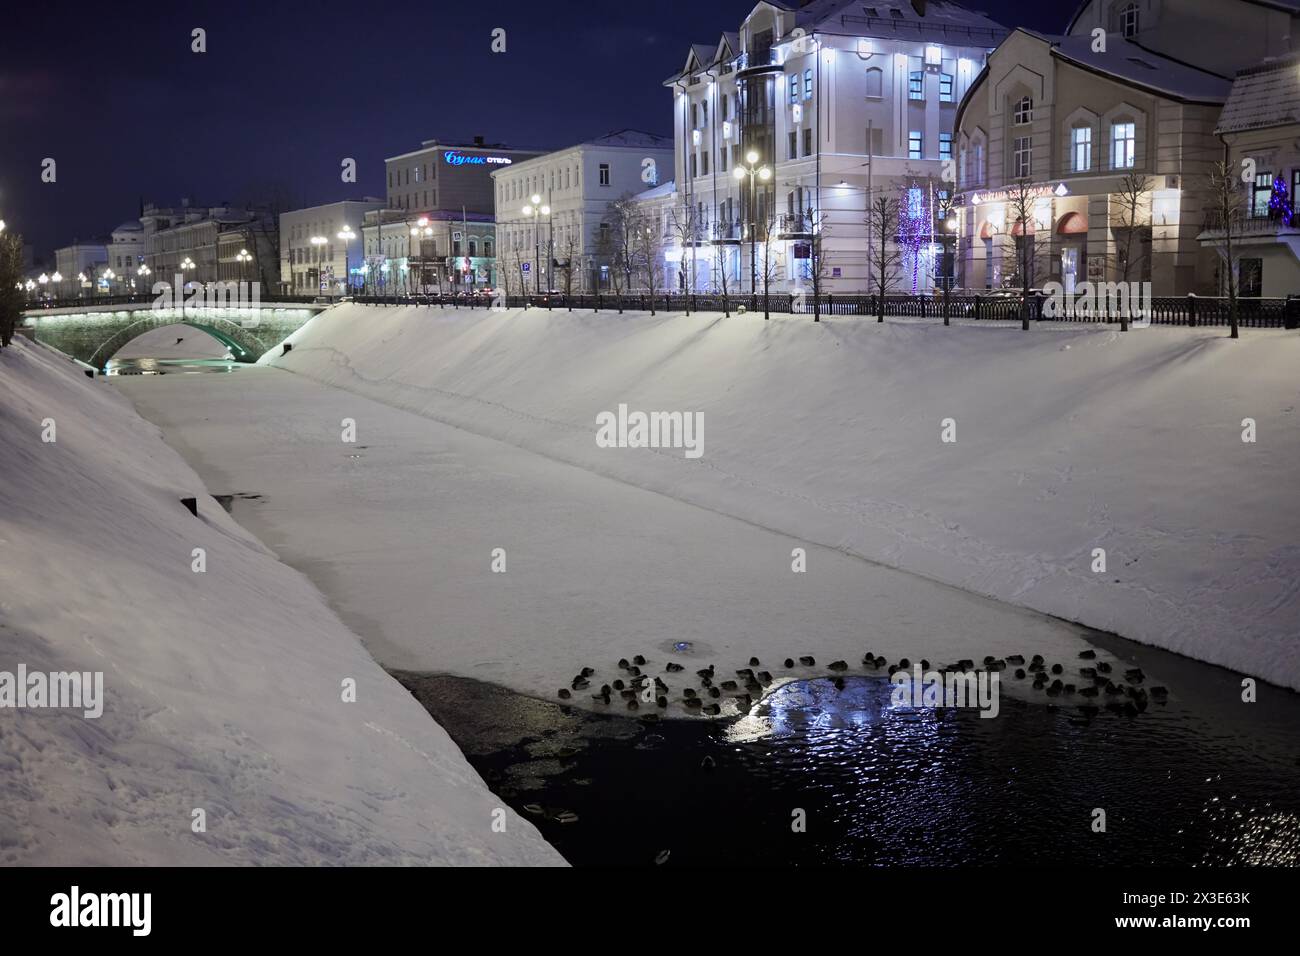 KAZAN, RUSSIA - DEC 08, 2017: Bulak river under ice and snow on winter evening. River name came from an obsolete tatar word Bolak meaning small river. Stock Photo